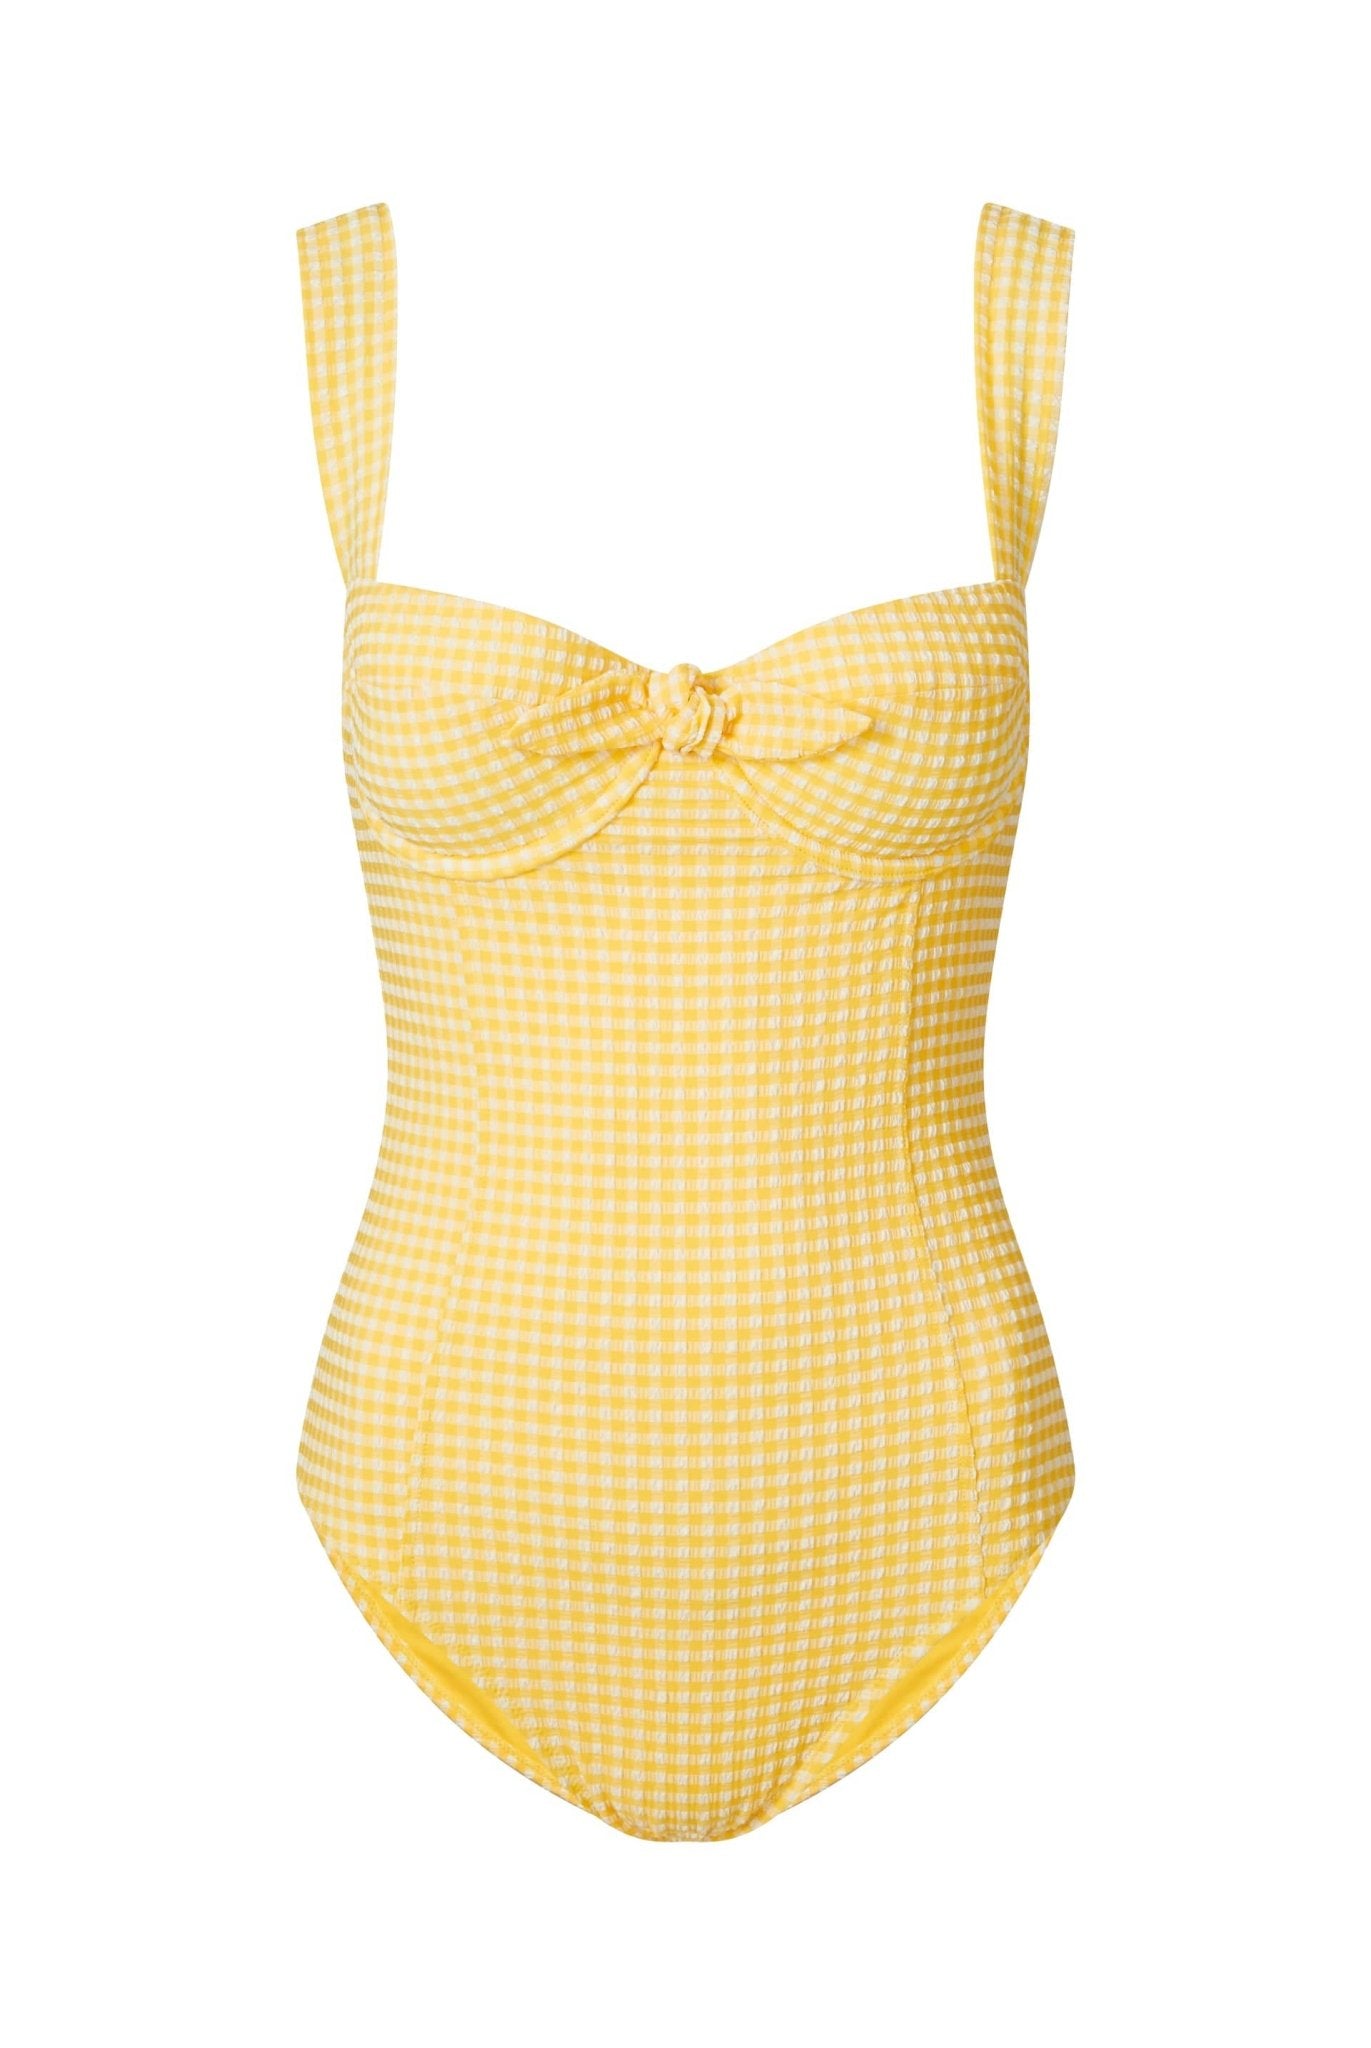 Cape Town Structured Cup One Piece in Yellow - Heidi Klein - UK Store